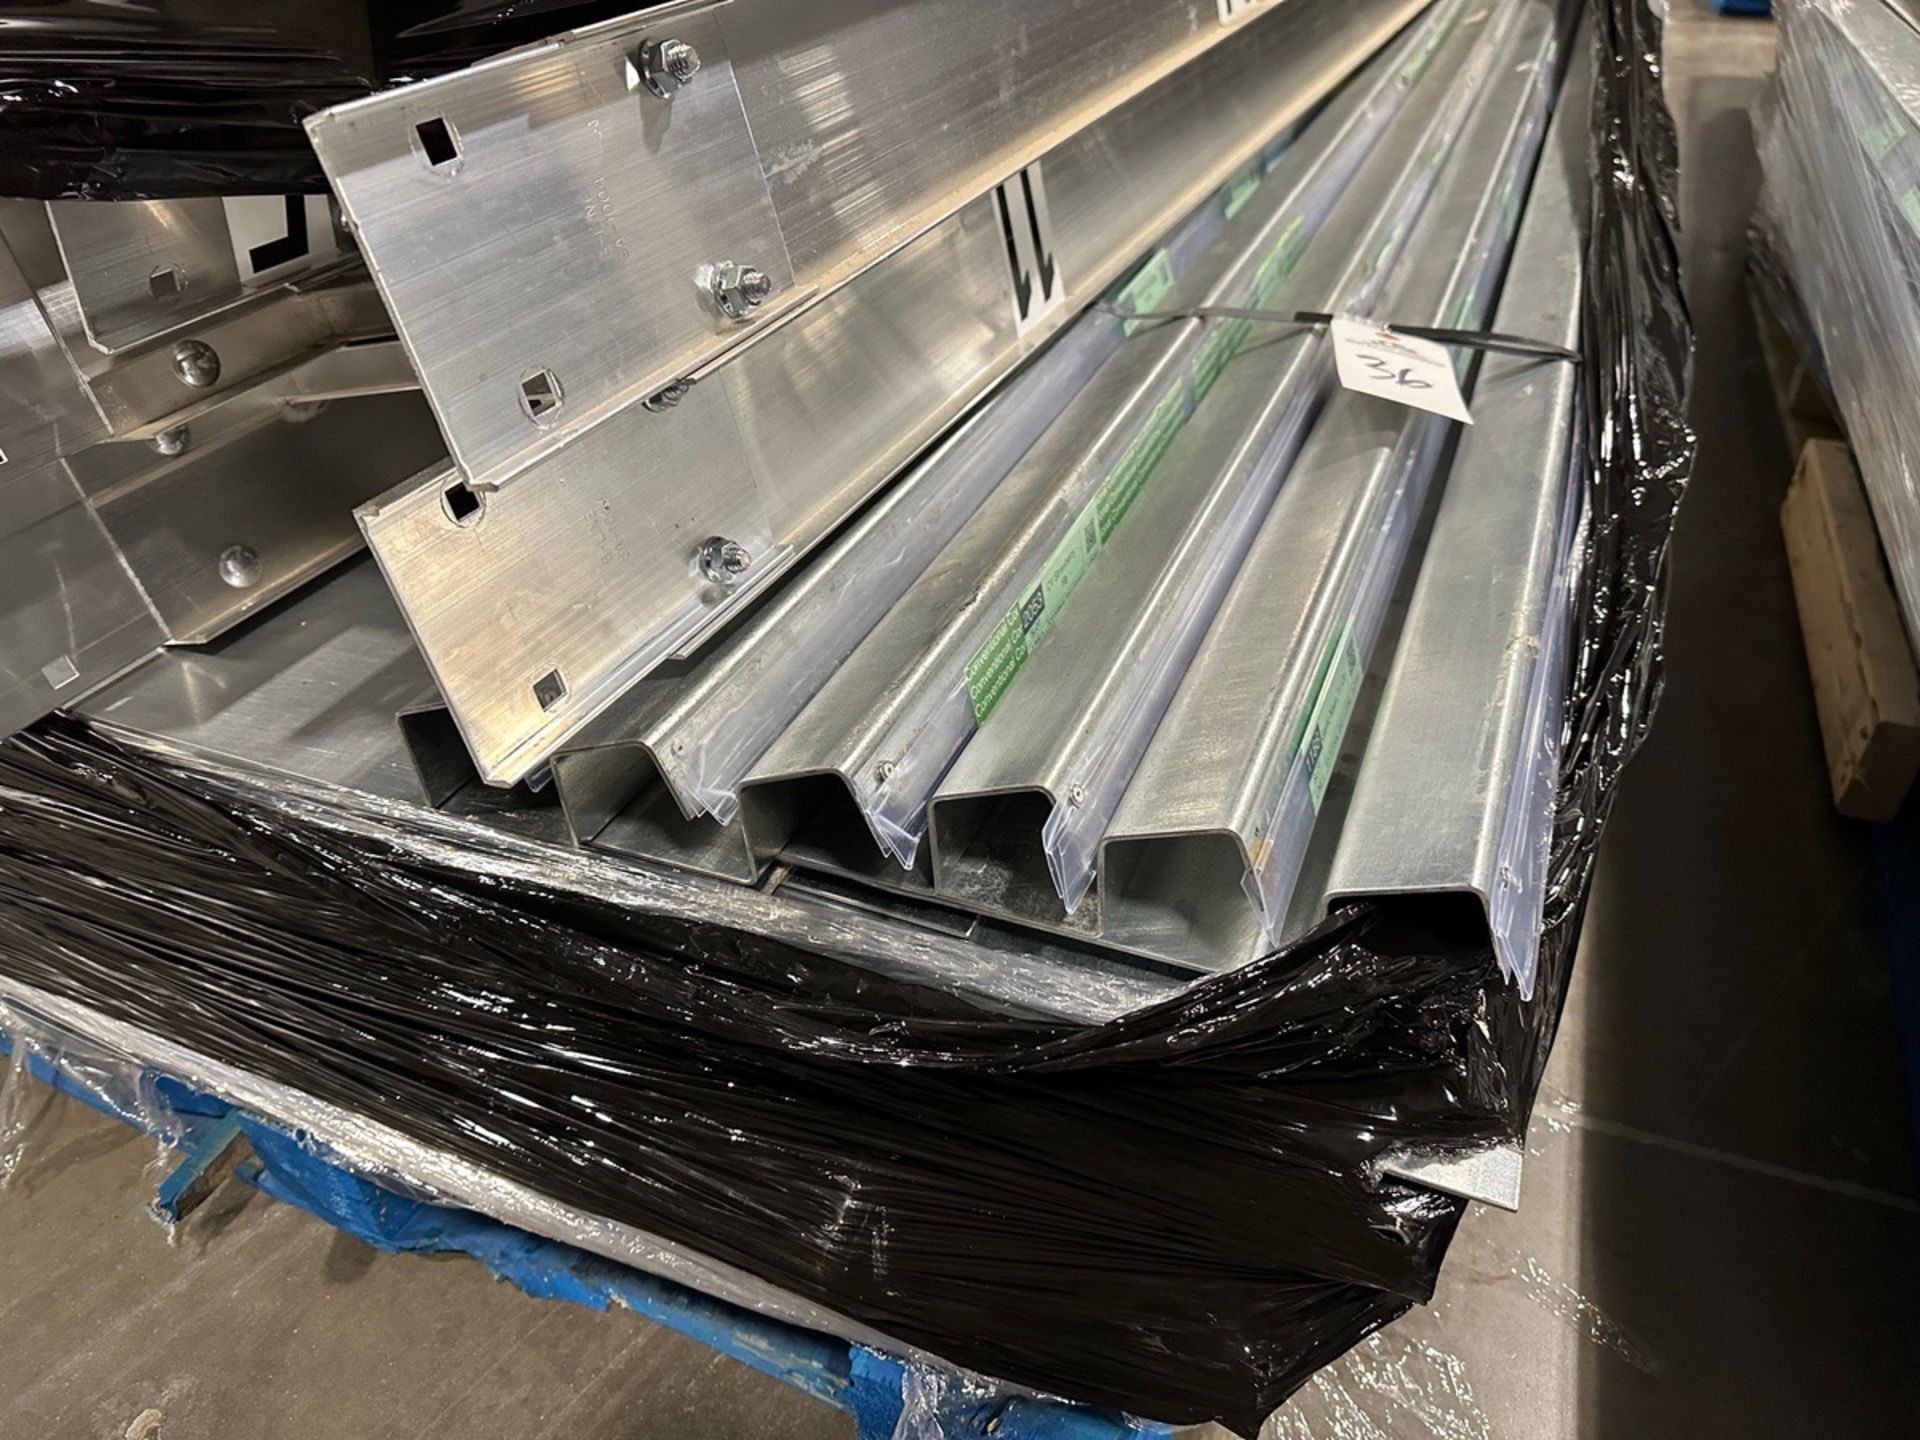 Lot of Approx. (30) Metal Shelves - 25" Deep x 95" Wide | Rig Fee $50